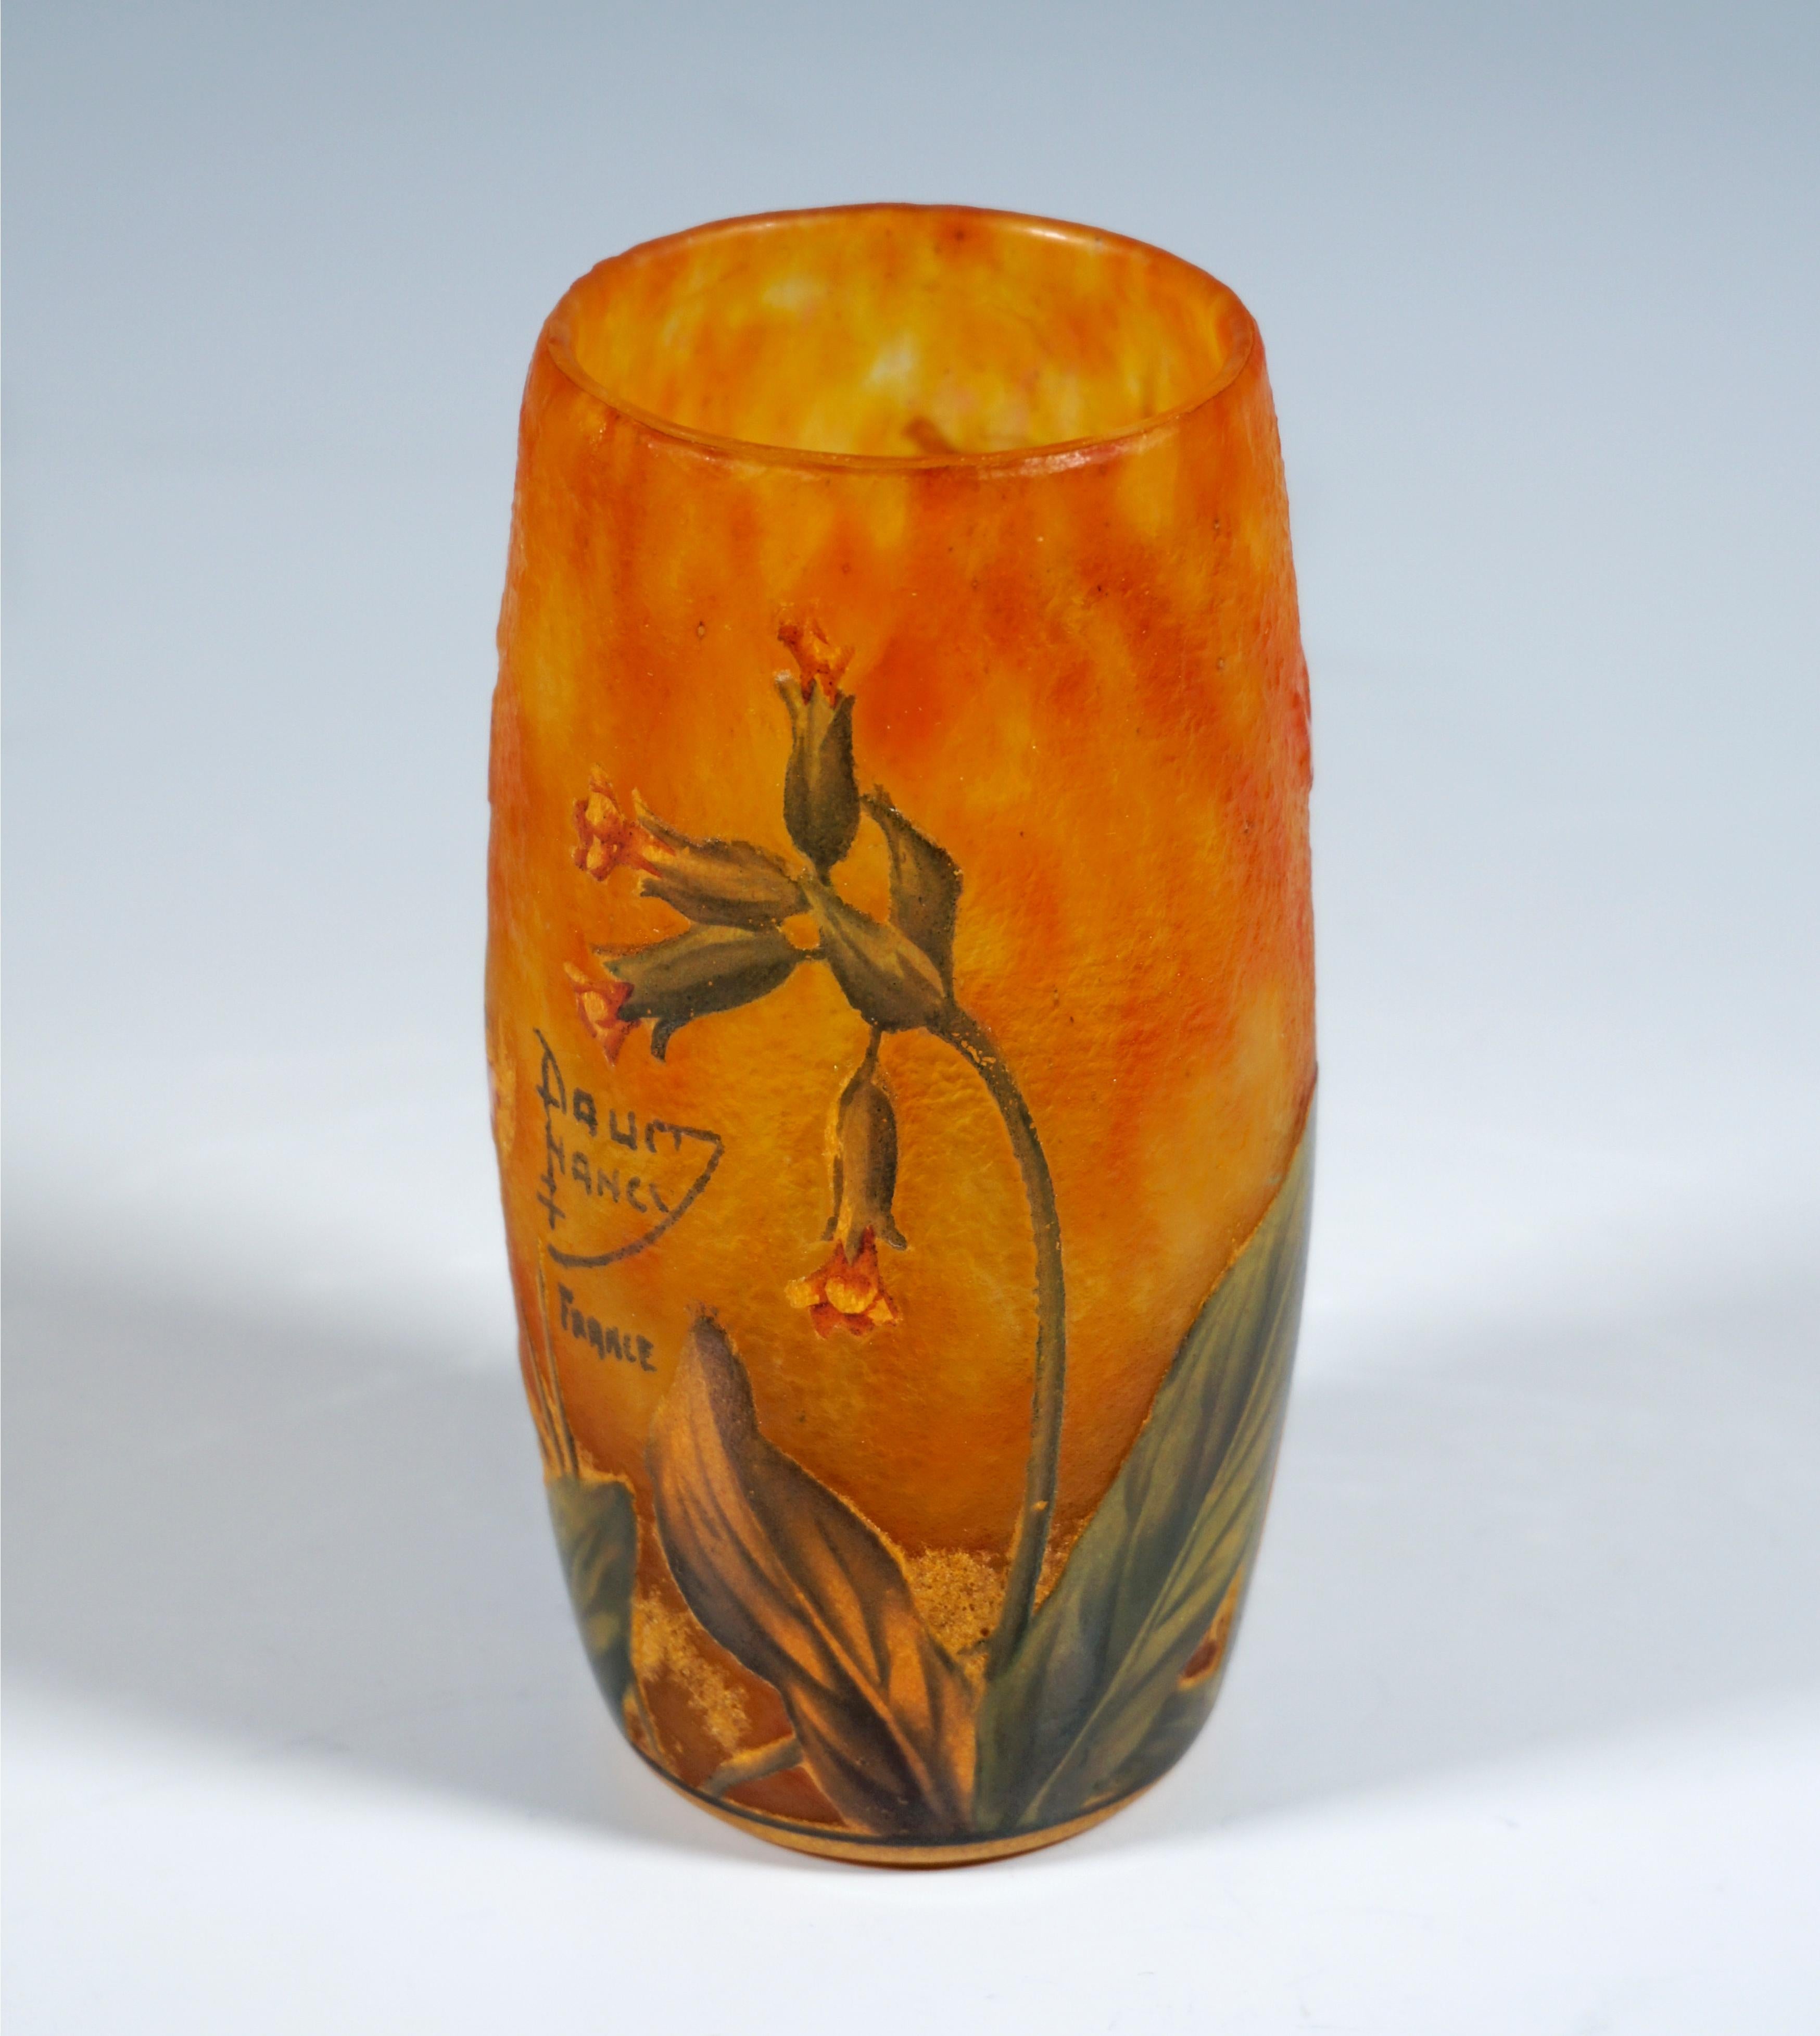 Art Nouveau Cameo Vase with Cowslips Decor, Daum Nancy, France, Ca 1900/05 In Good Condition For Sale In Vienna, AT